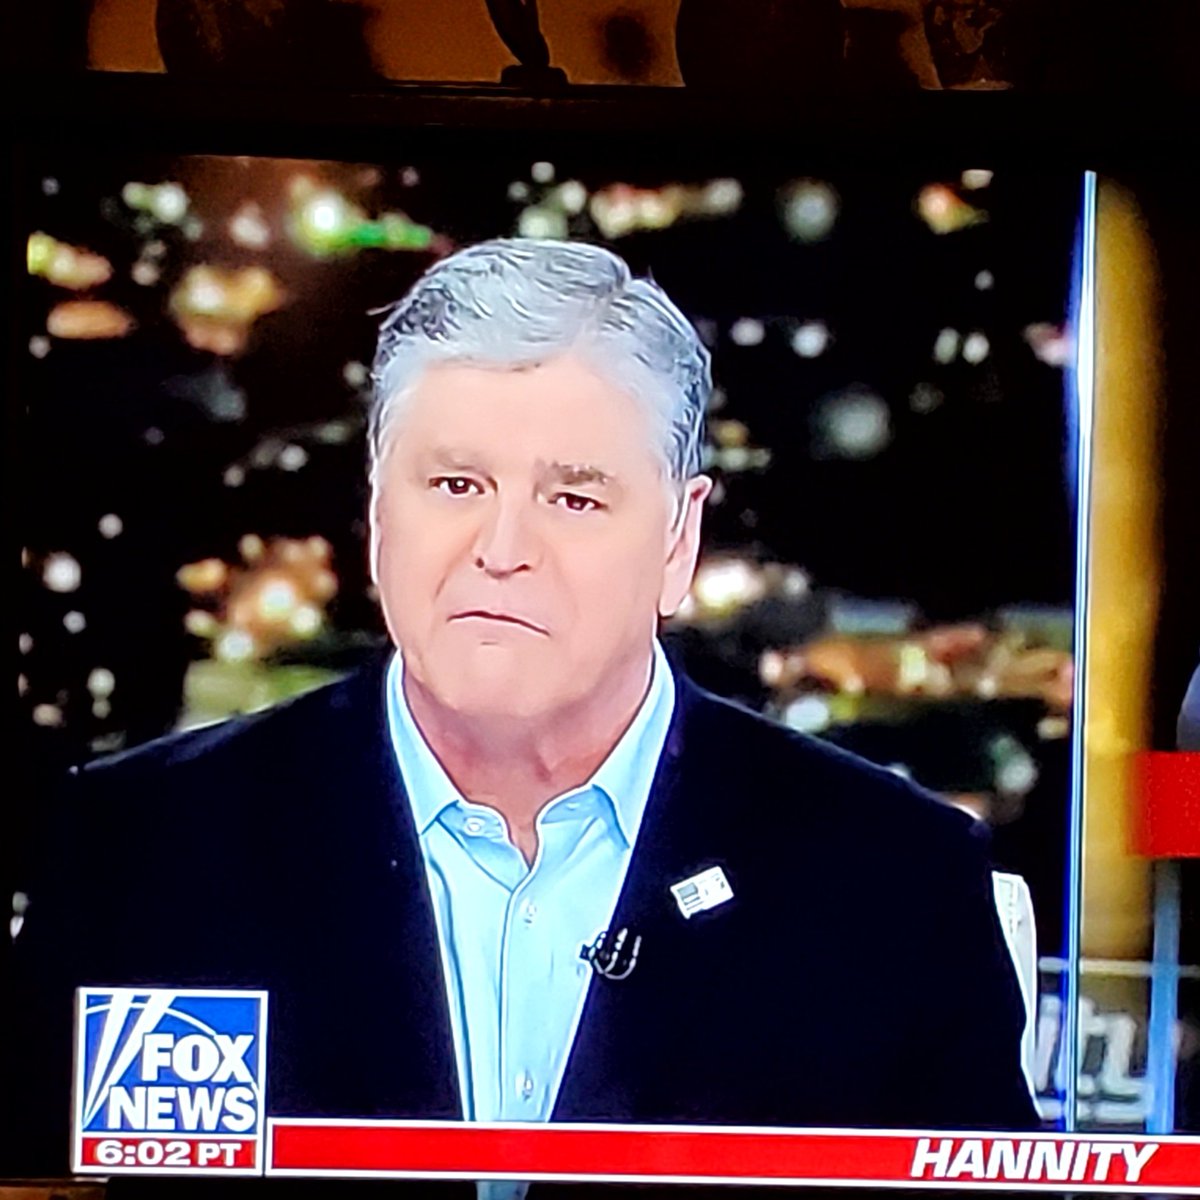 .@seanhannity showing how unprofessional he is by referring to #CNN as #fskenews. Did he forget that it was his network #FoxNews that just paid #Dominion $787 million for telling lies.